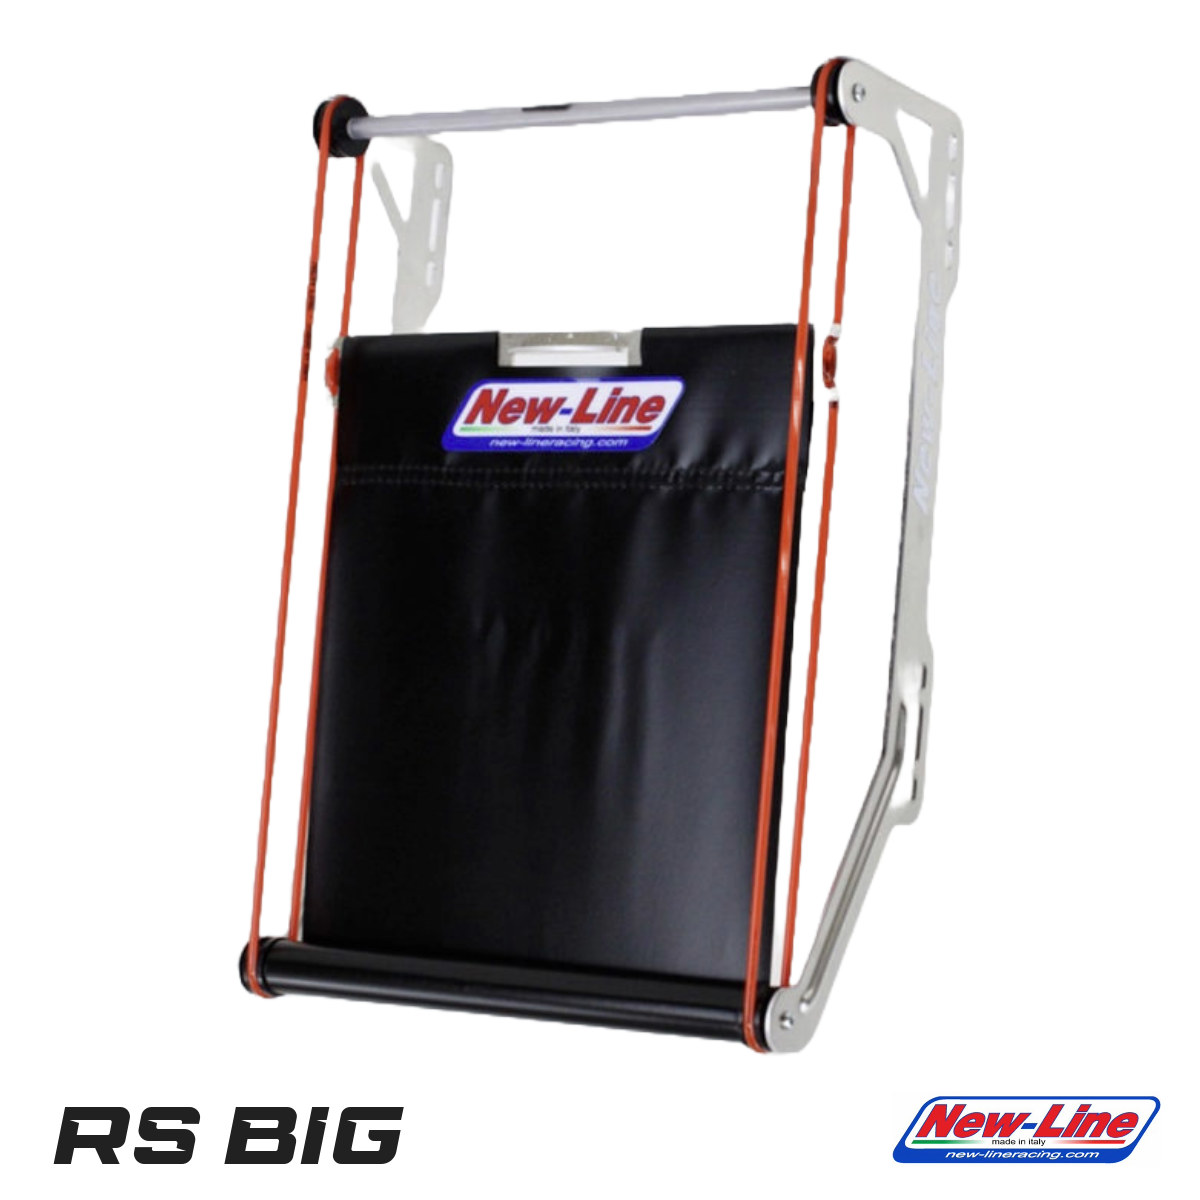 New-Line RS BIG curtain